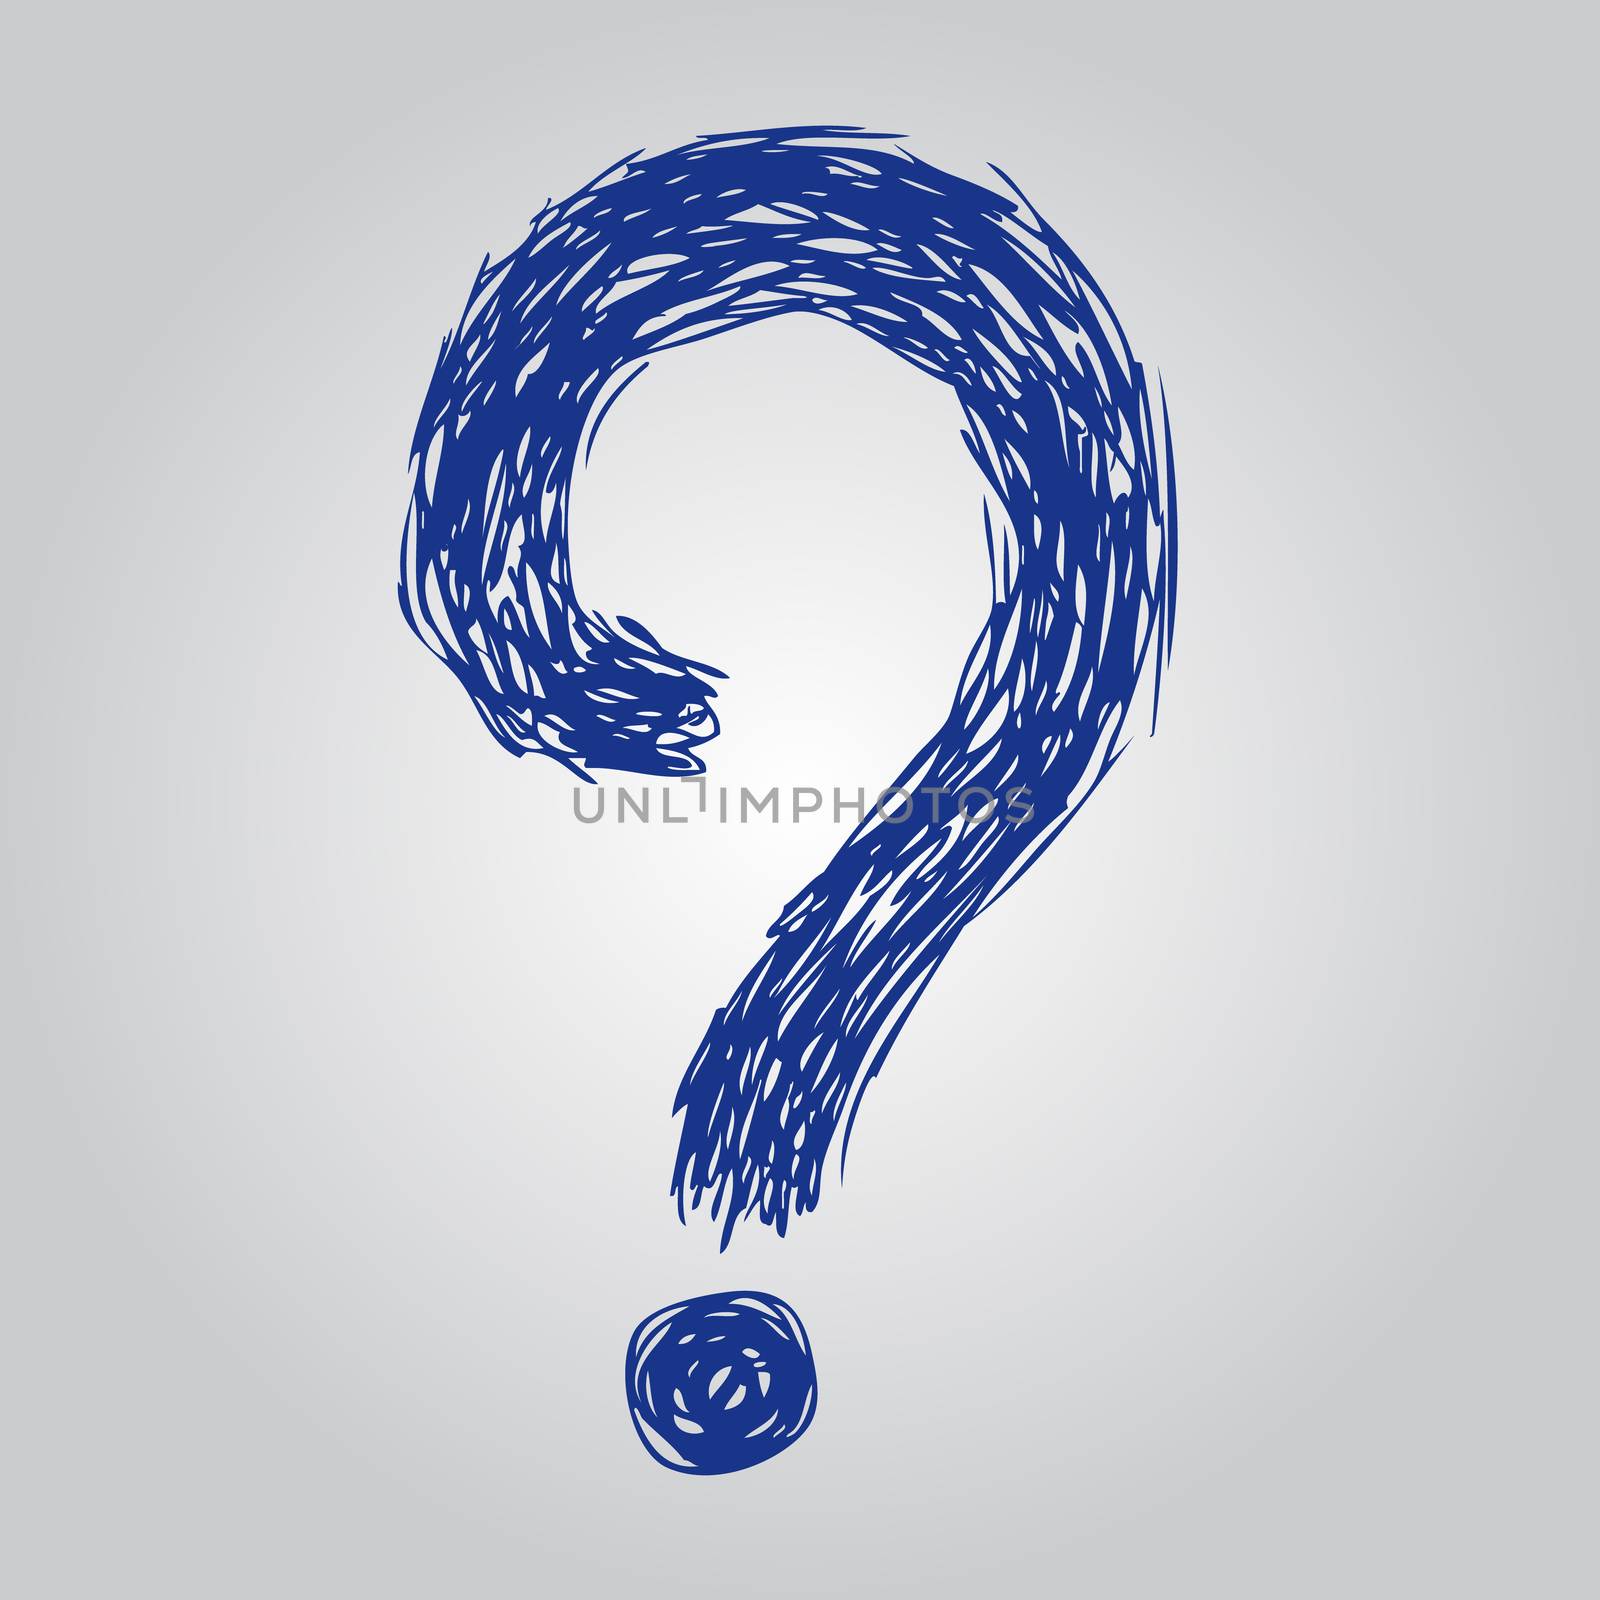 freehand sketch illustration of question marks doodle hand drawn